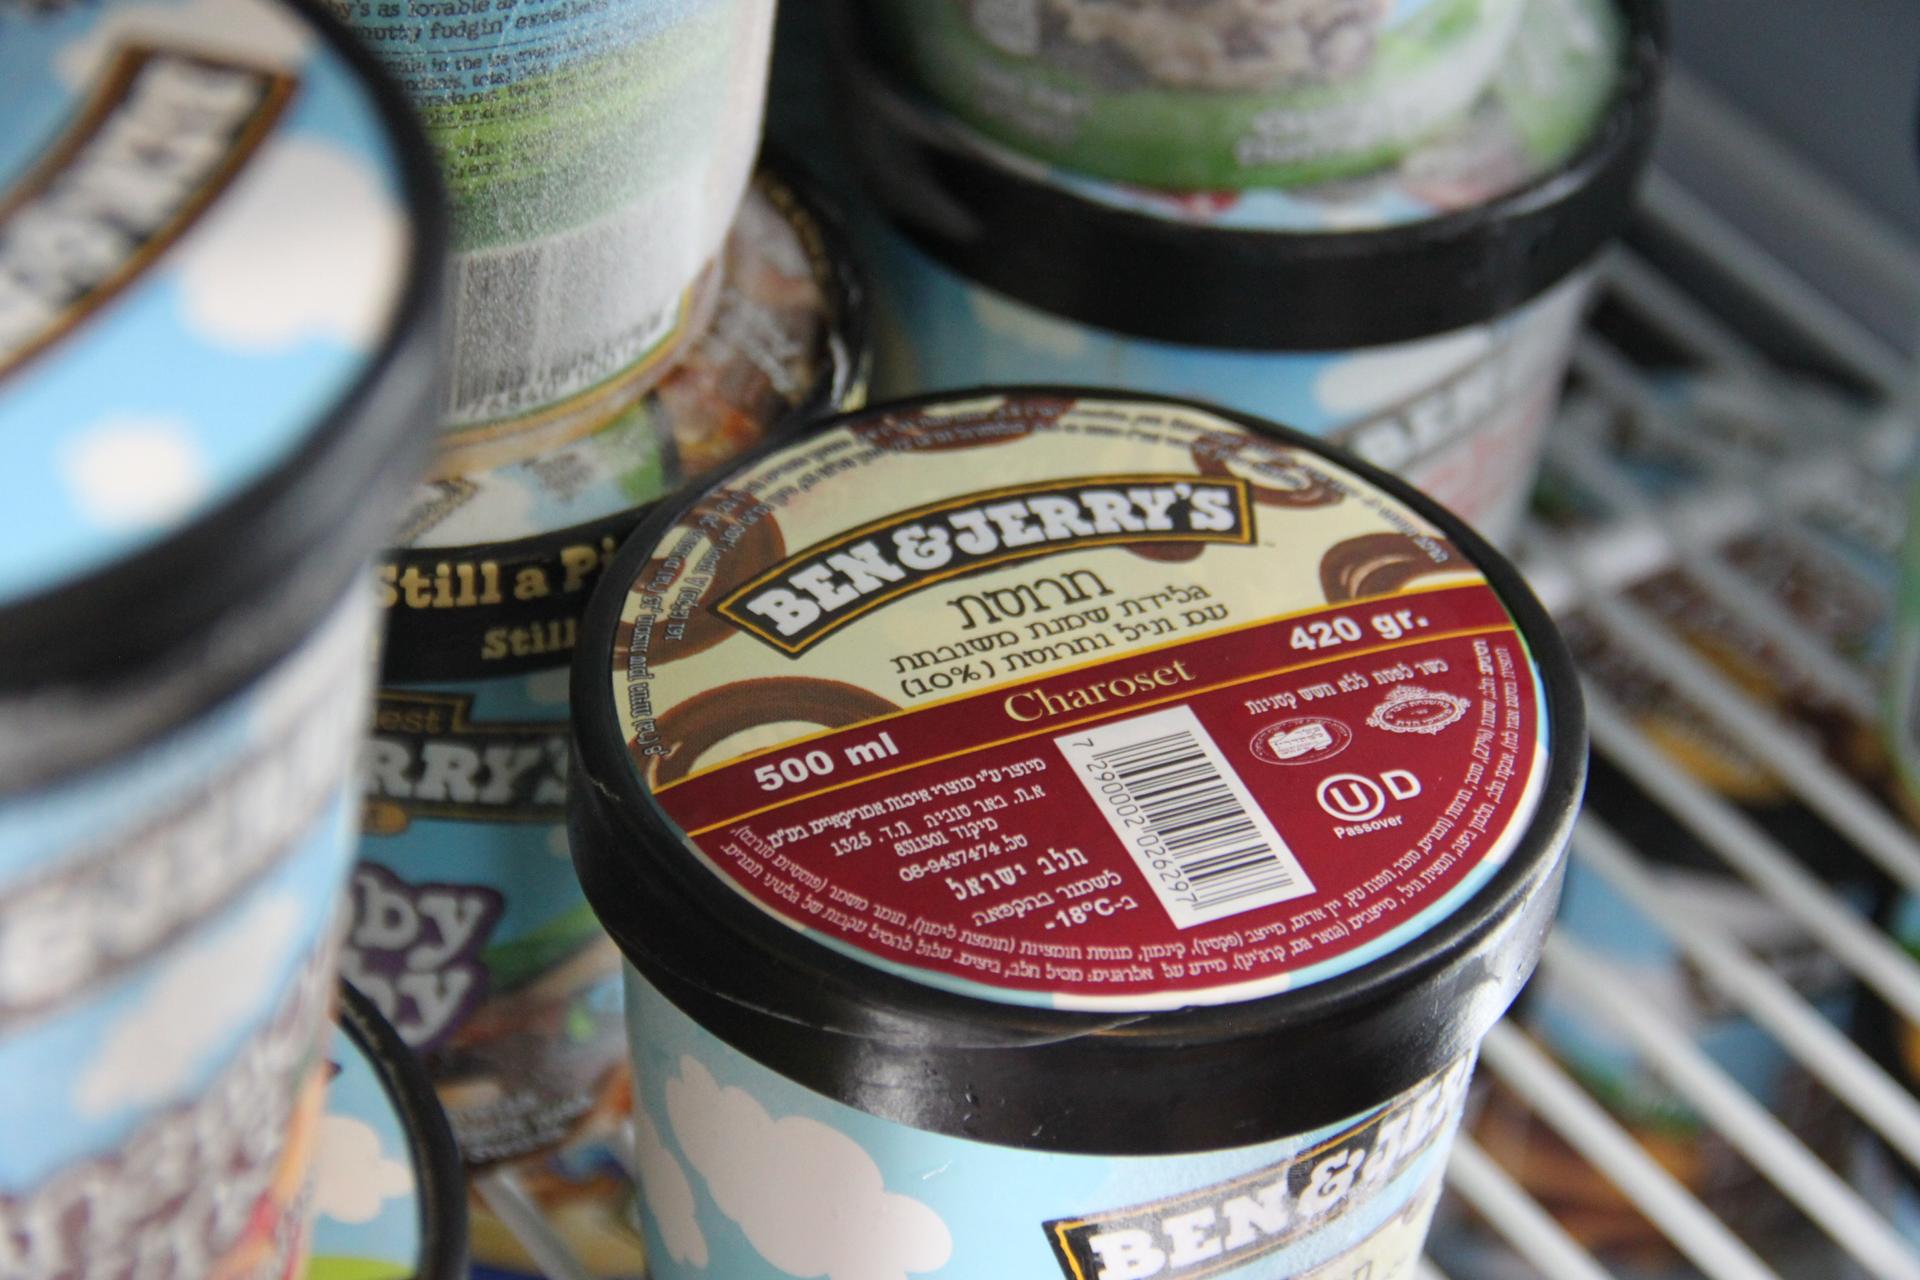 Just in time for Passover, Ben and Jerry's is offering vanilla ice cream with a swirl of charoset straight from the seder table.